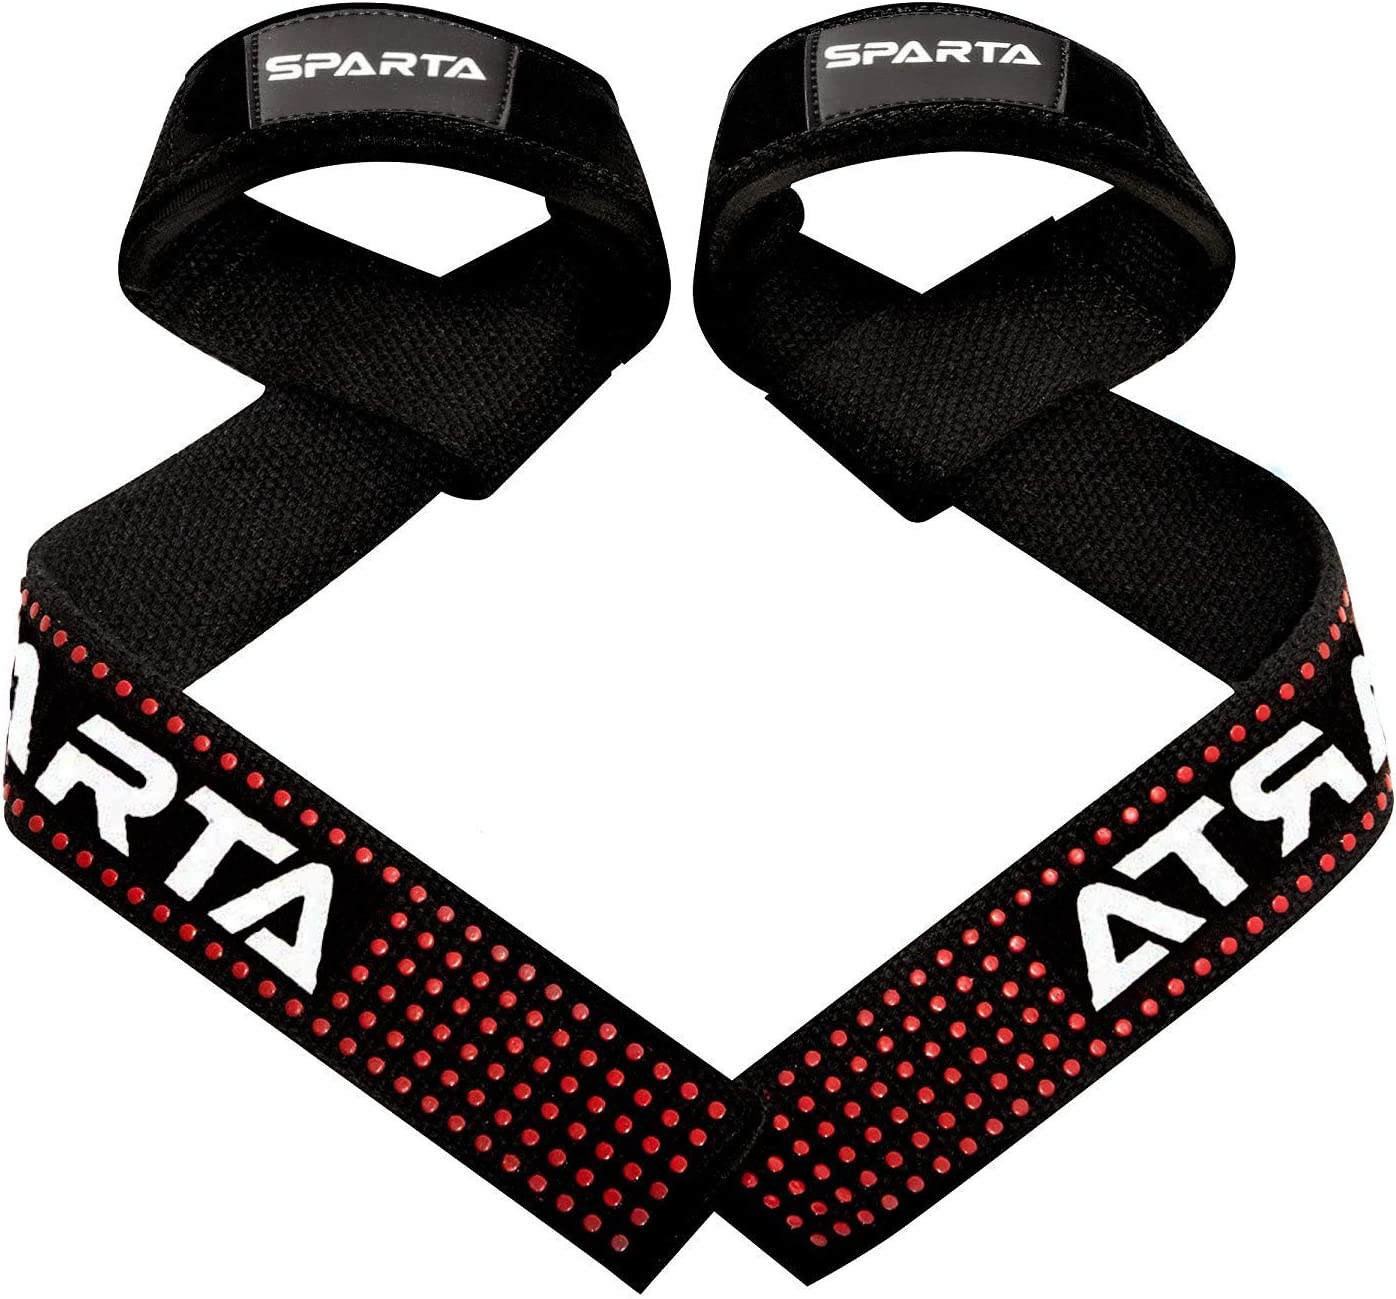 Sparta Weight Lifting Straps With Padded Wrist Support